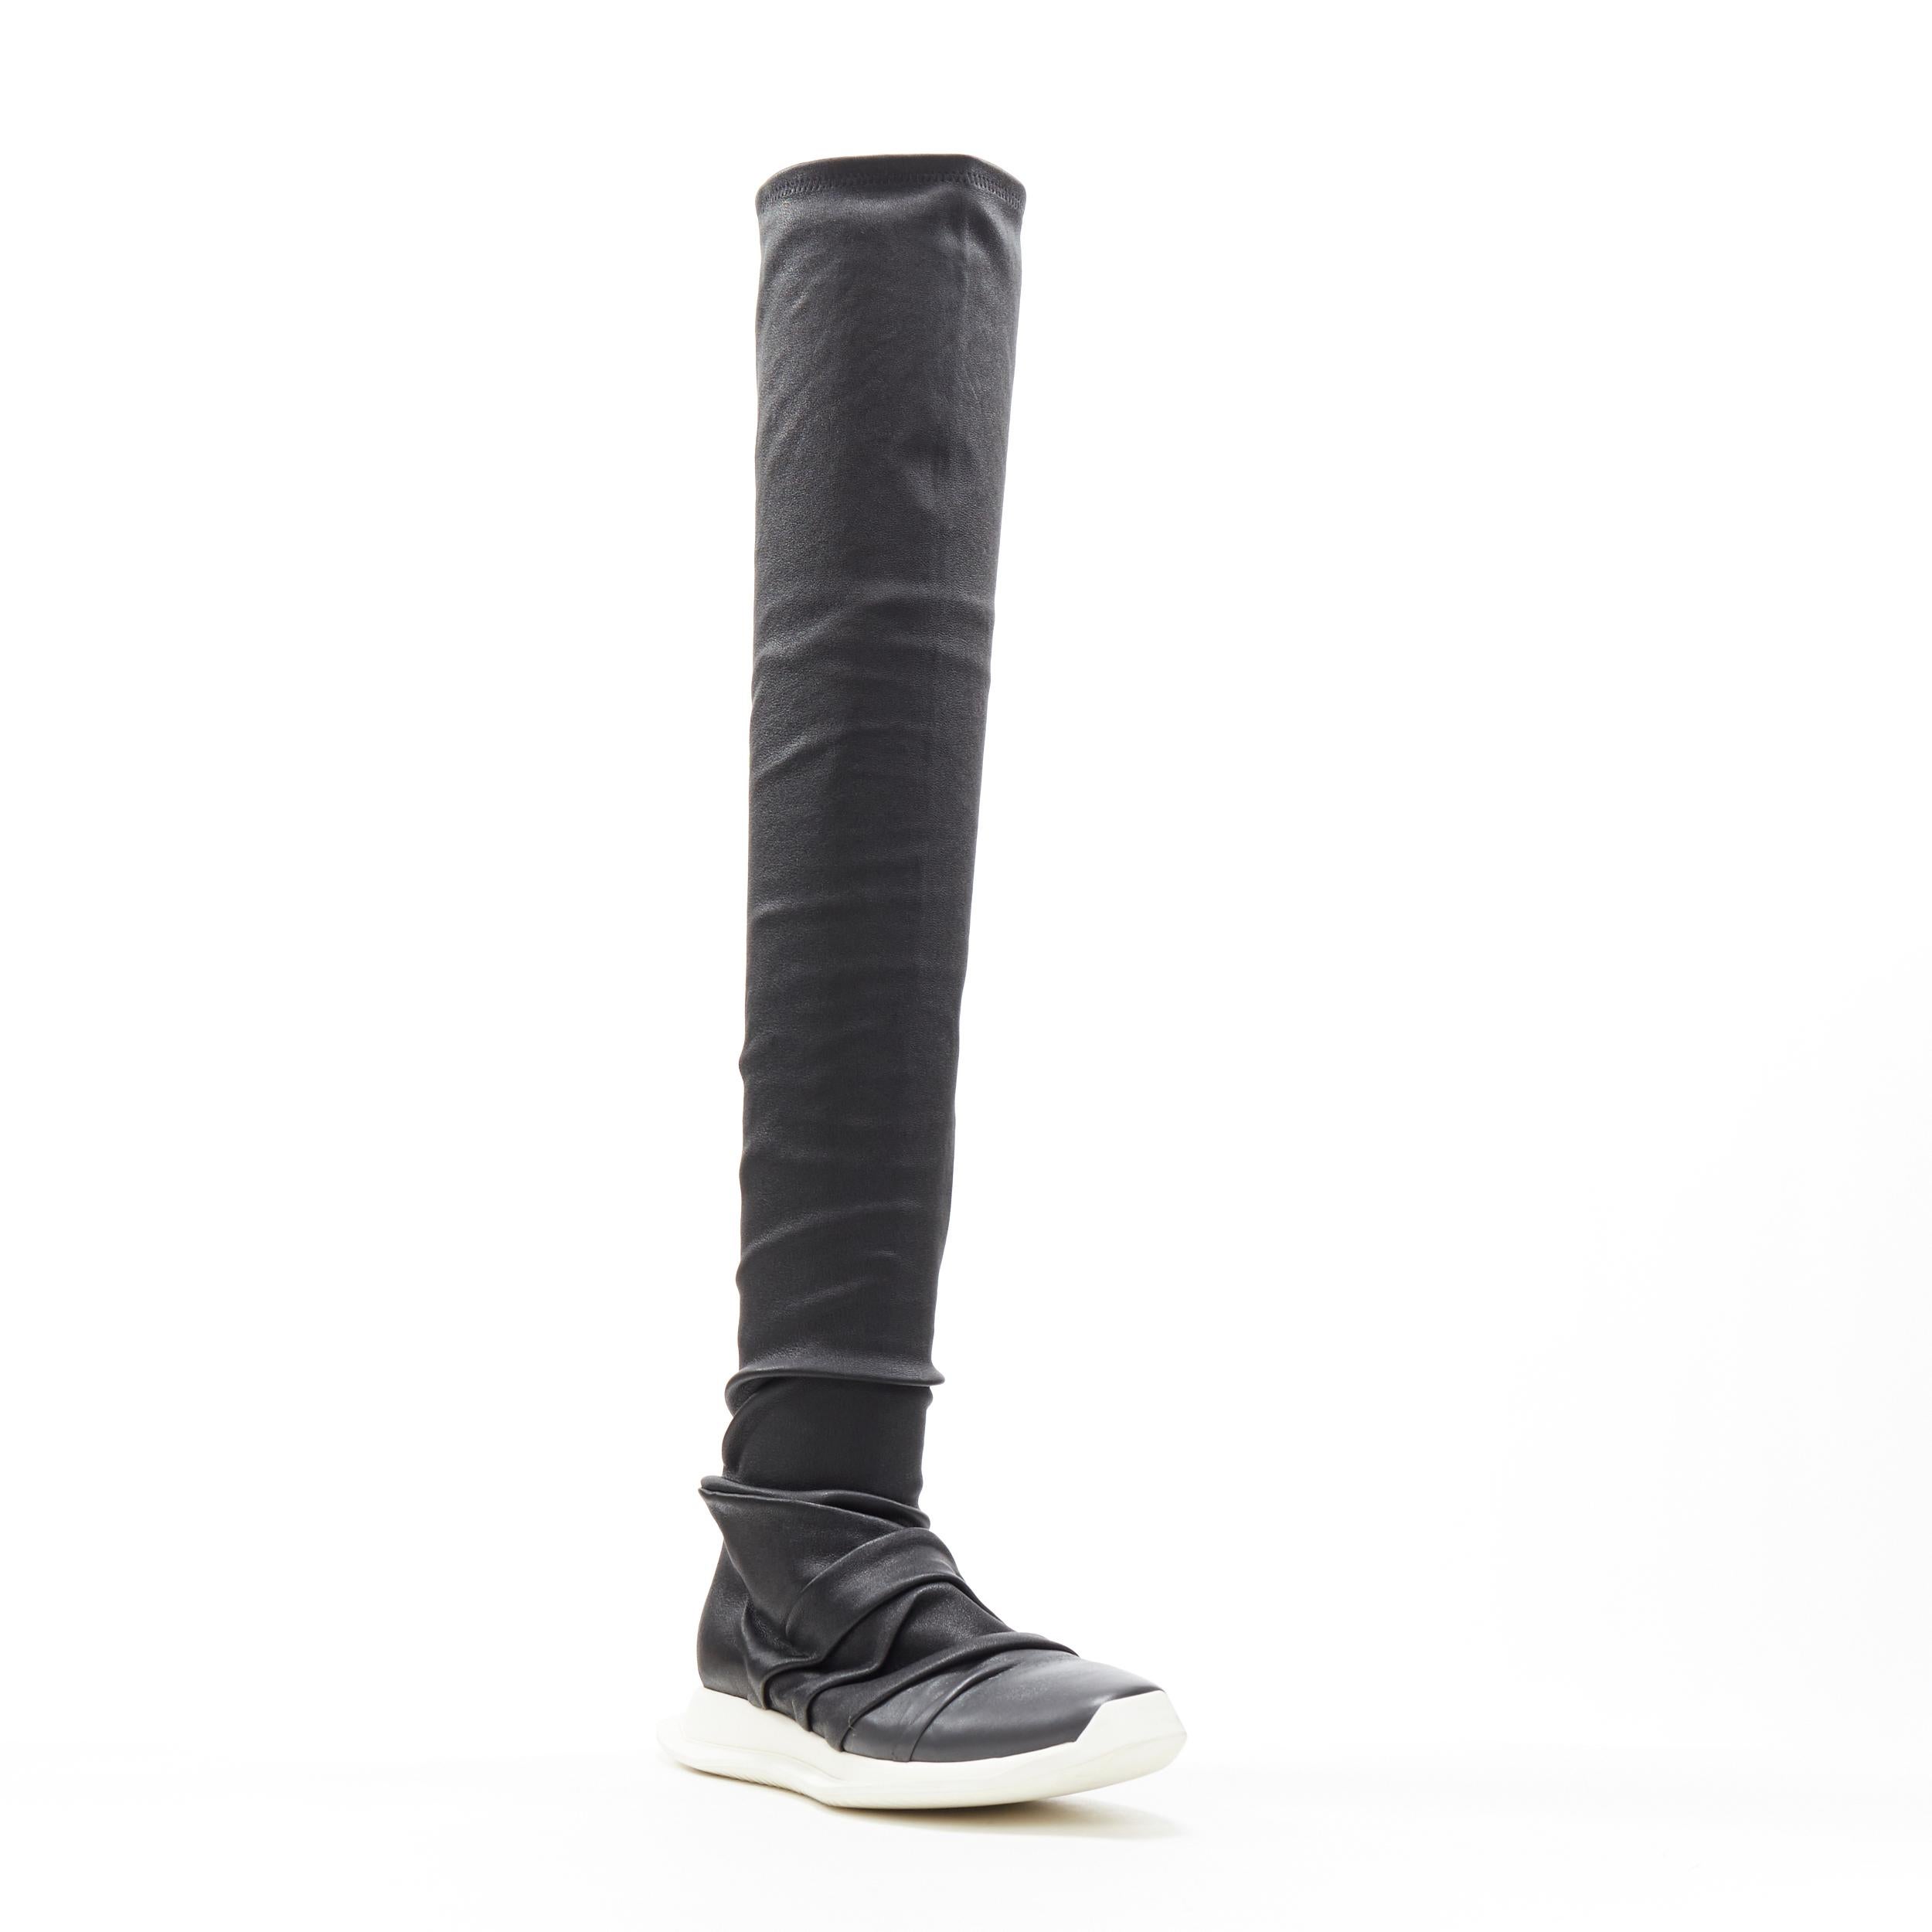 new RICK OWENS Runway Draped Oblique stretch leather knee high sneaker EU35.5 Reference: TGAS/B01177 
Brand: Rick Owens 
Designer: Rick Owens 
Model: Draped Oblique stocker sneaker 
Material: Leather 
Color: Black 
Pattern: Solid 
Closure: Stretch